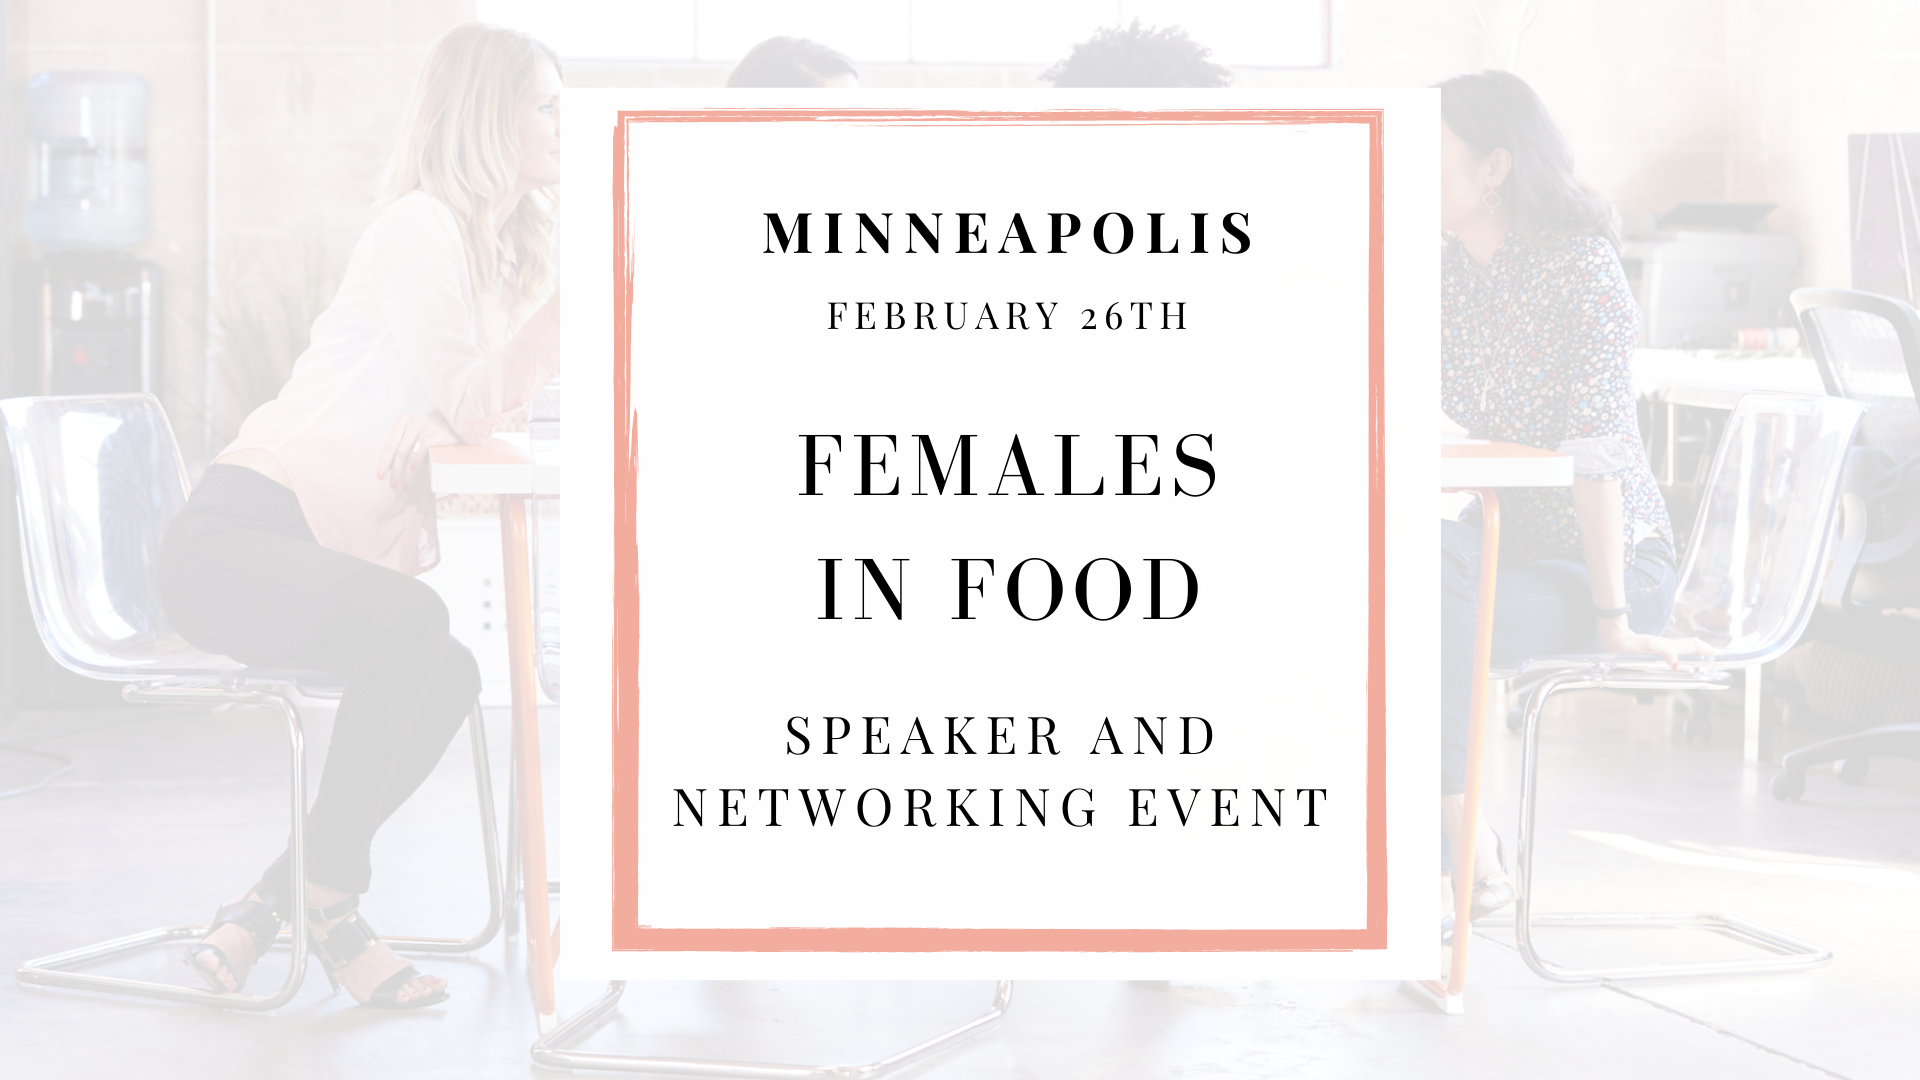 MINNEAPOLIS - Females in Food - Speaker and Networking Event